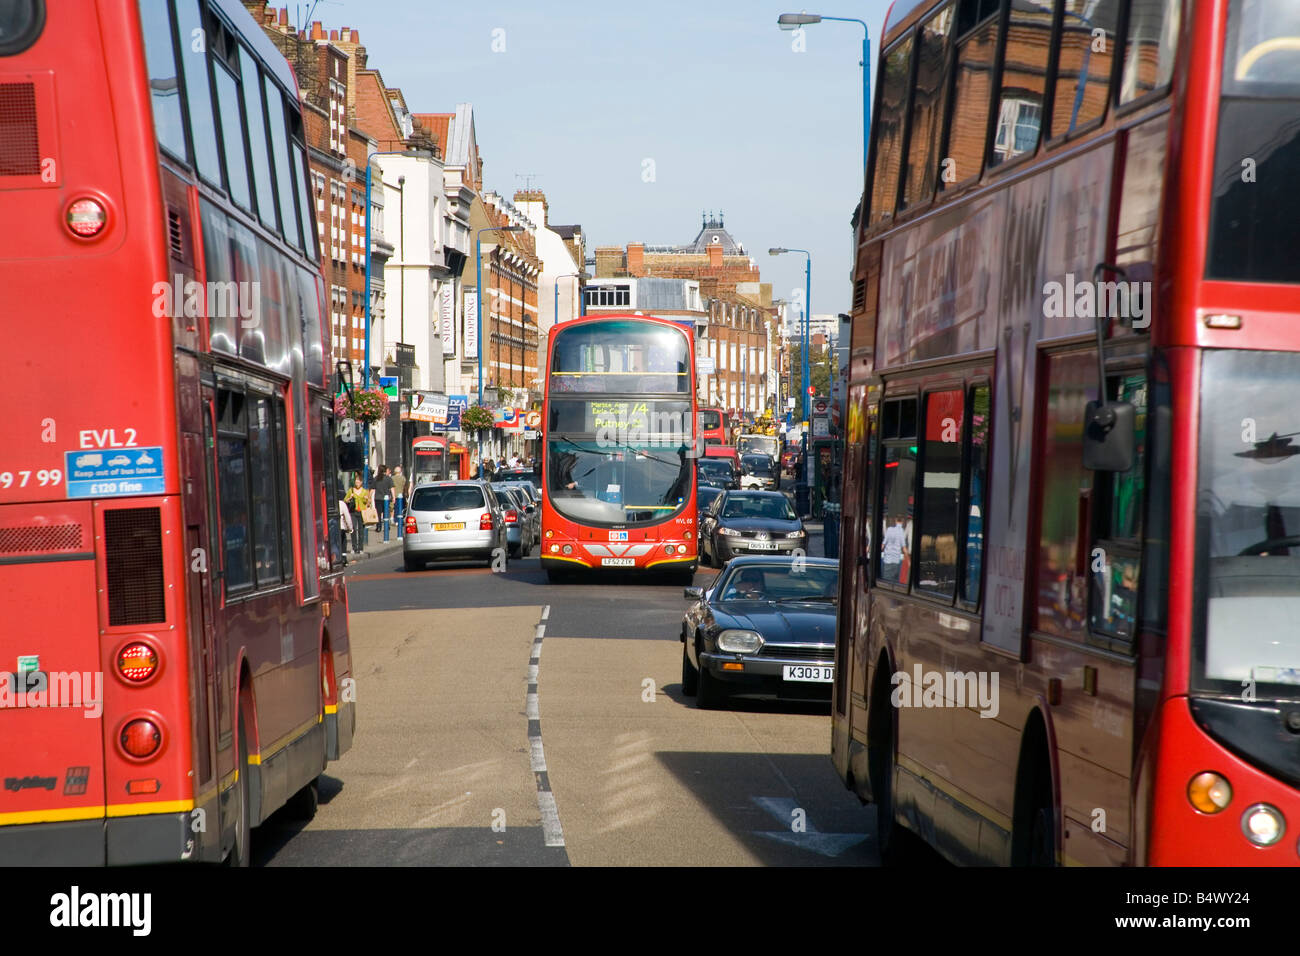 London Buses in busy Putney High street Stock Photo